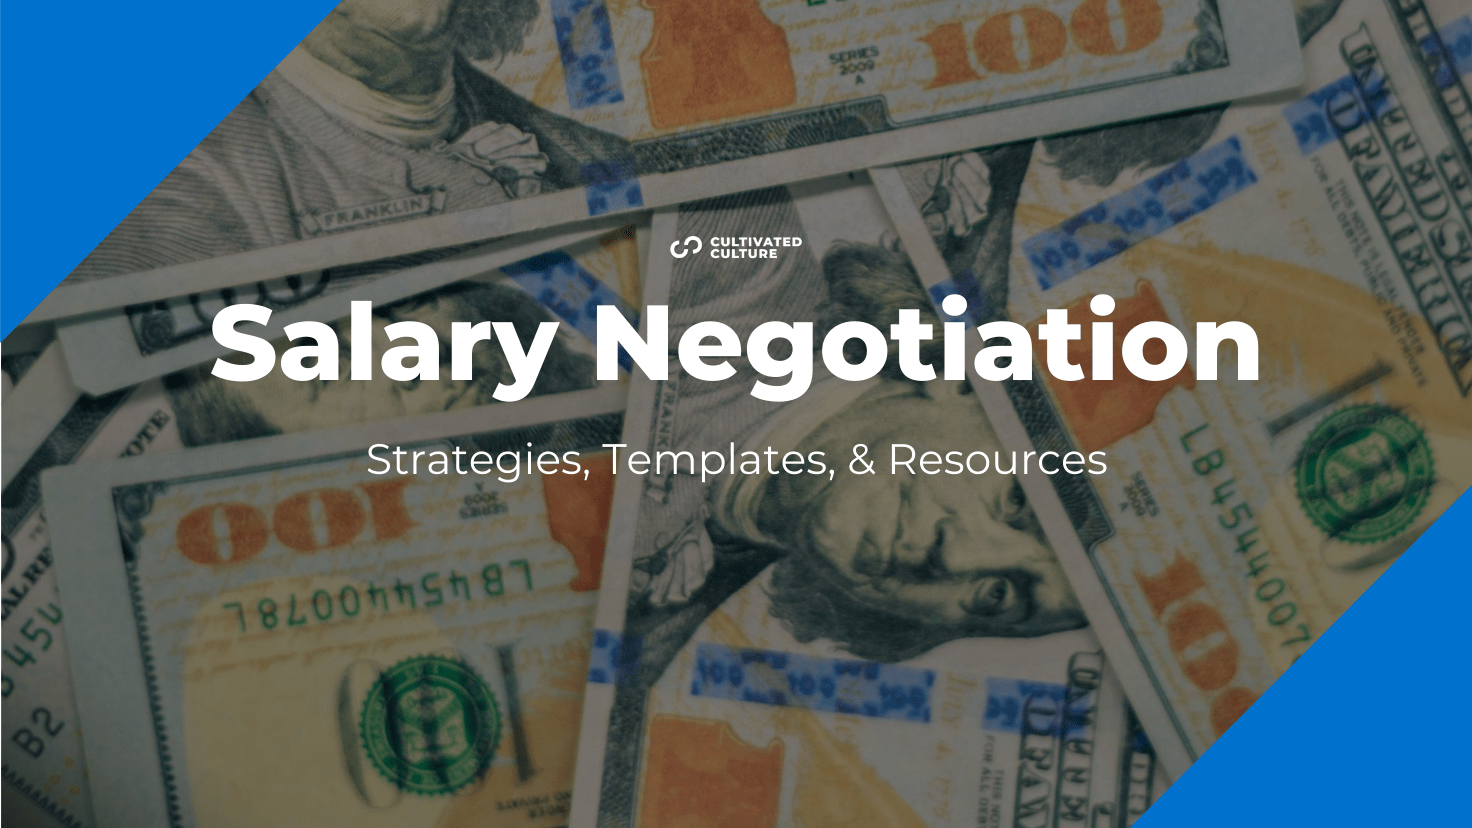 Salary Negotiation Strategies, Templates, & Resources Featured Image